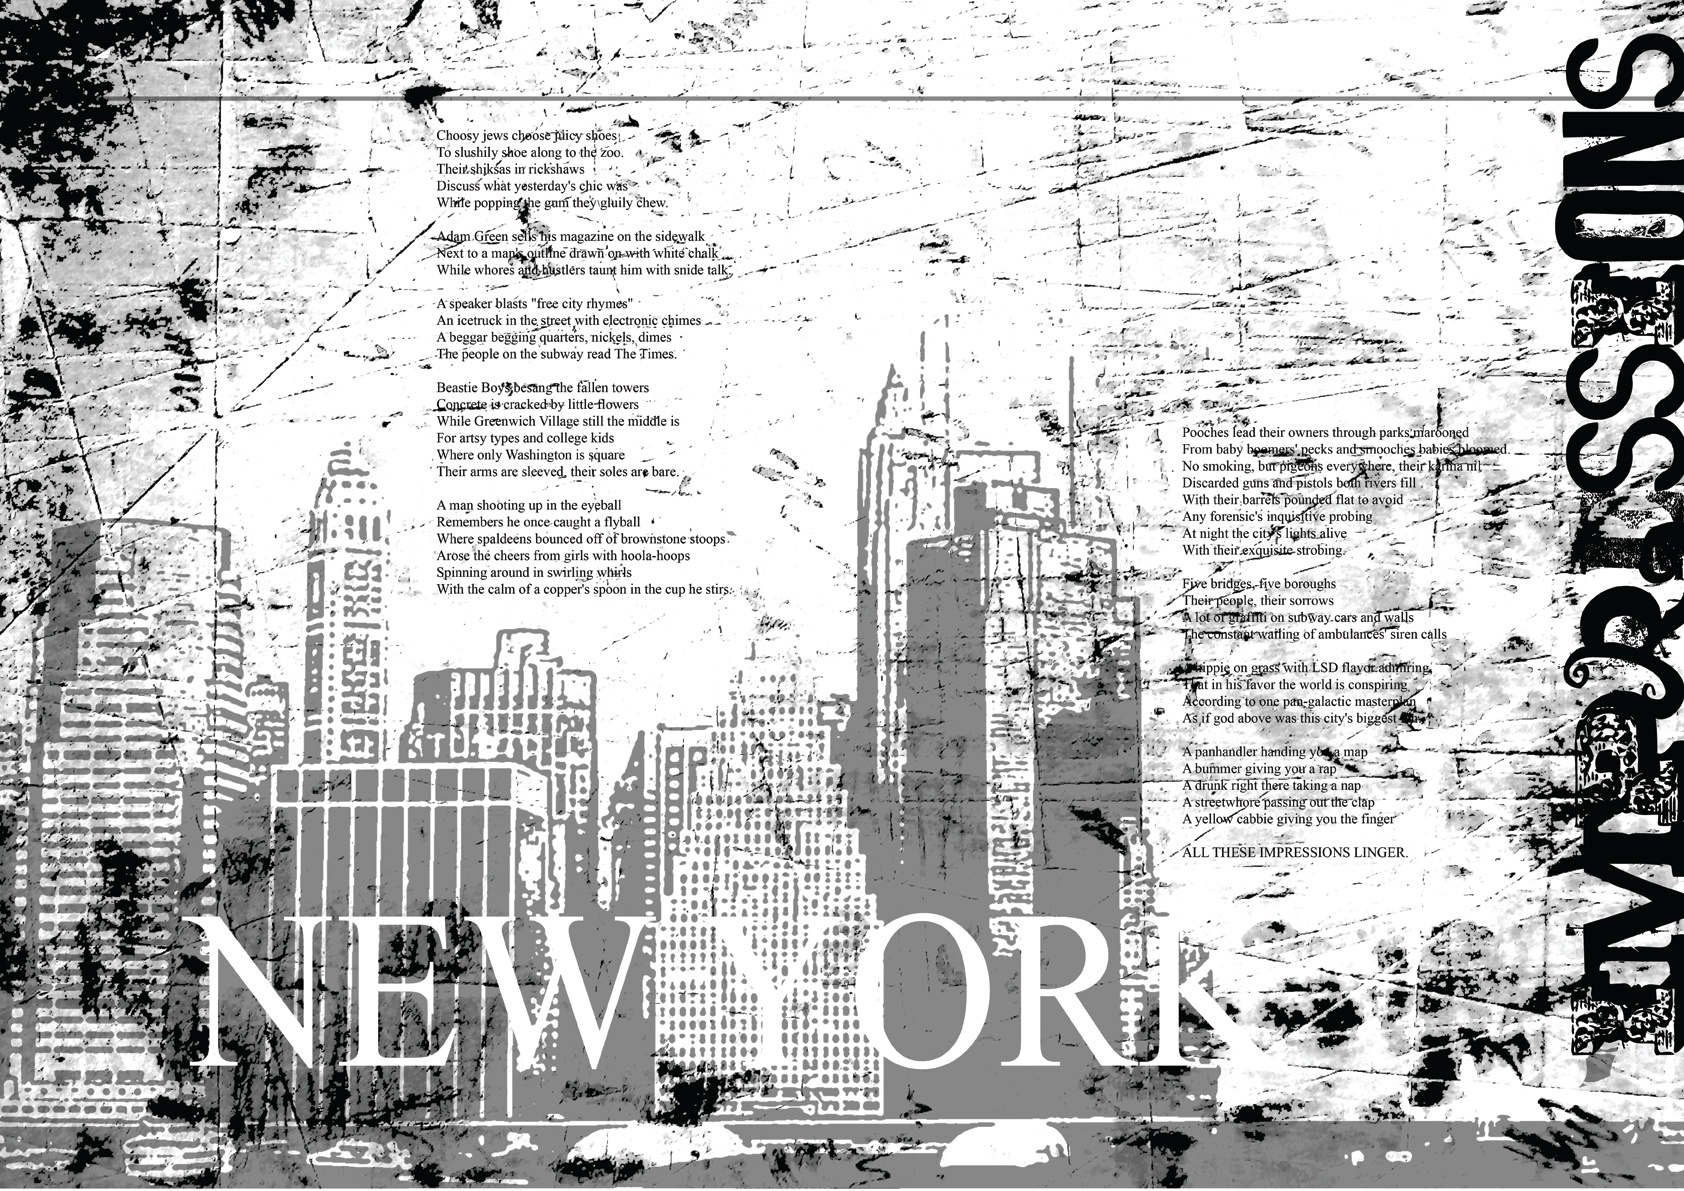 NYC impressions. A poem by Jakob Straub, illustrated by Joel D. Poischen